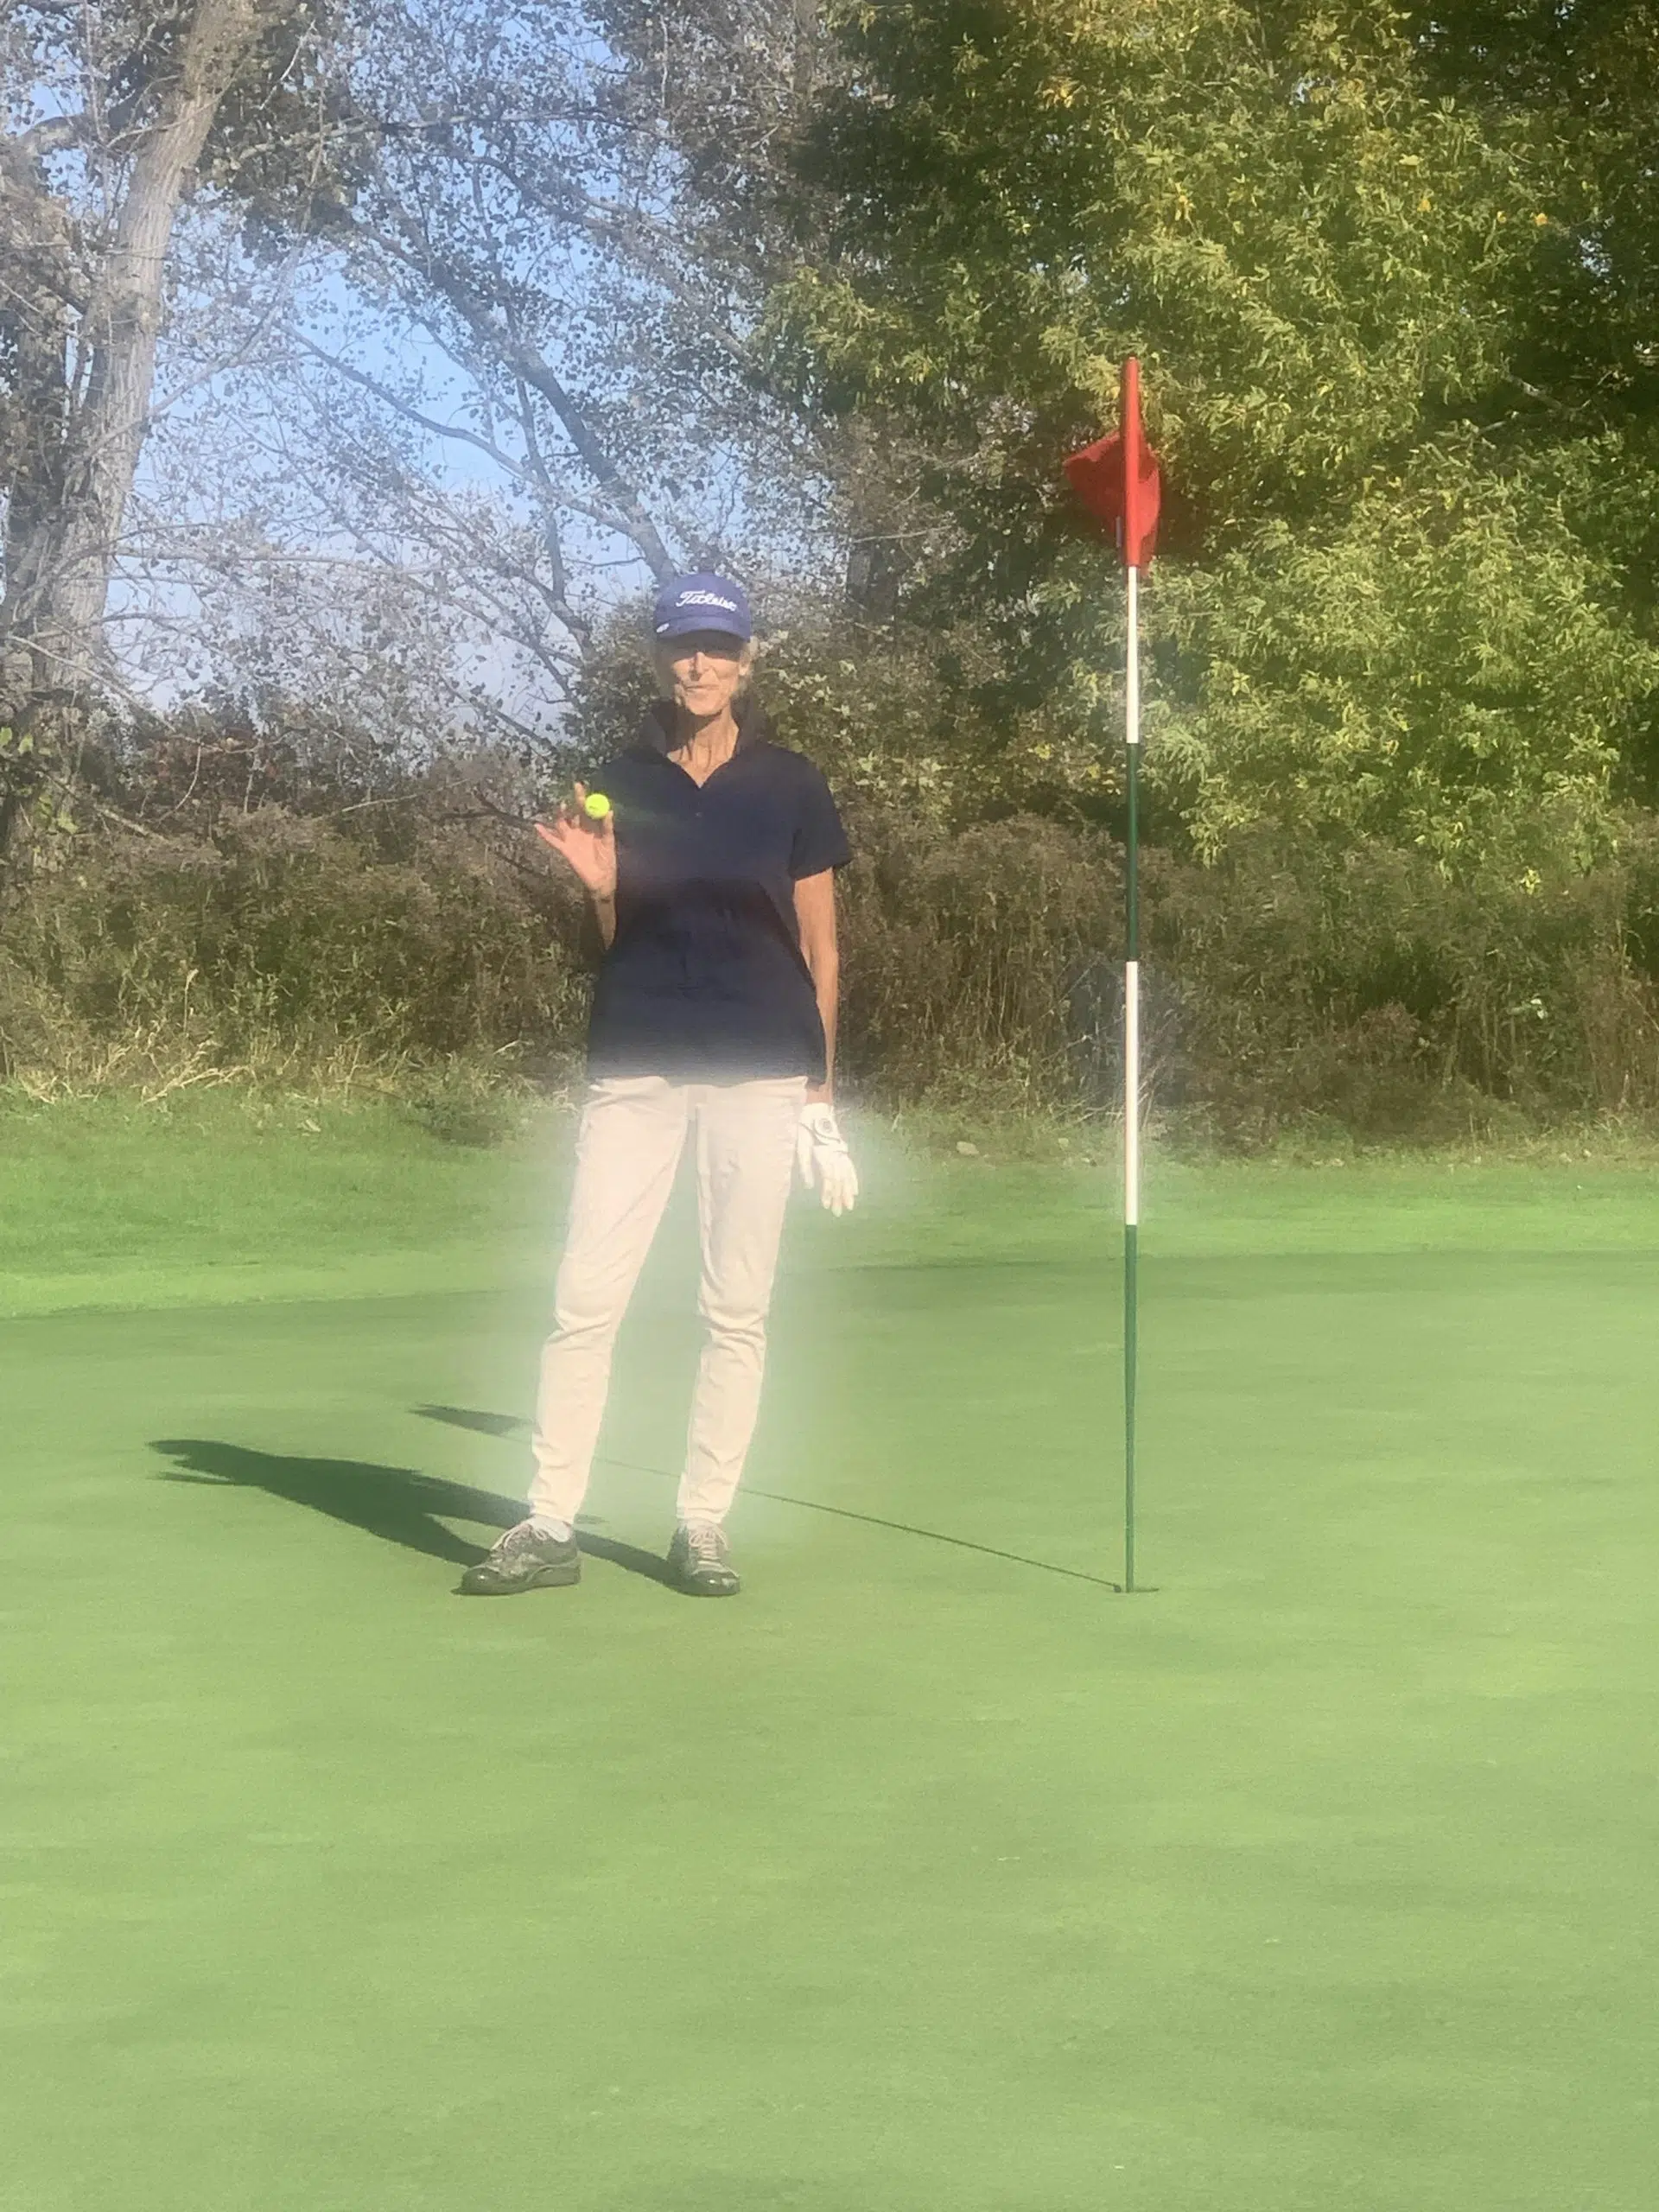 Thanksgiving for Holes In One